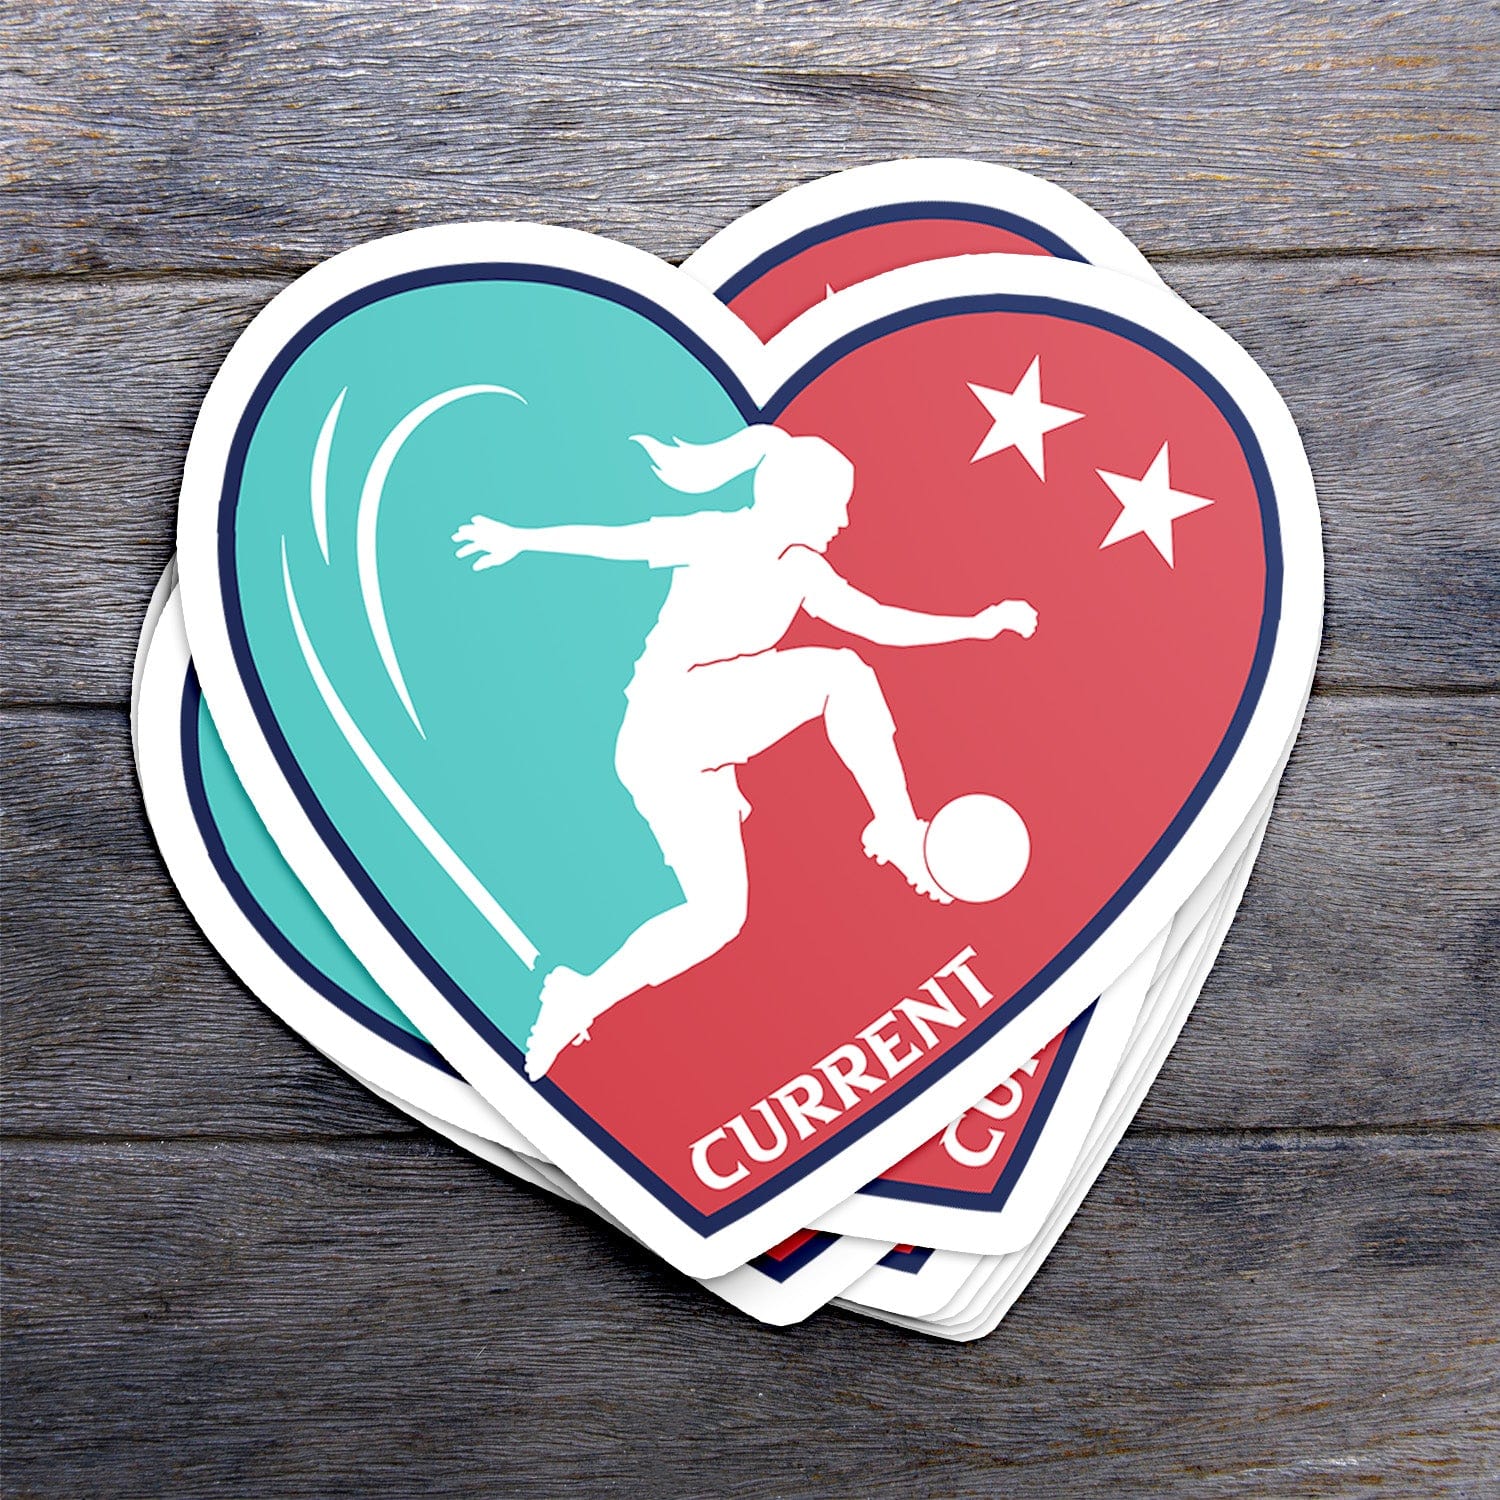 KC Swag Kansas City Current PLAYER HEART die-cut sticker decal made from waterproof vinyl stack on dark wood table